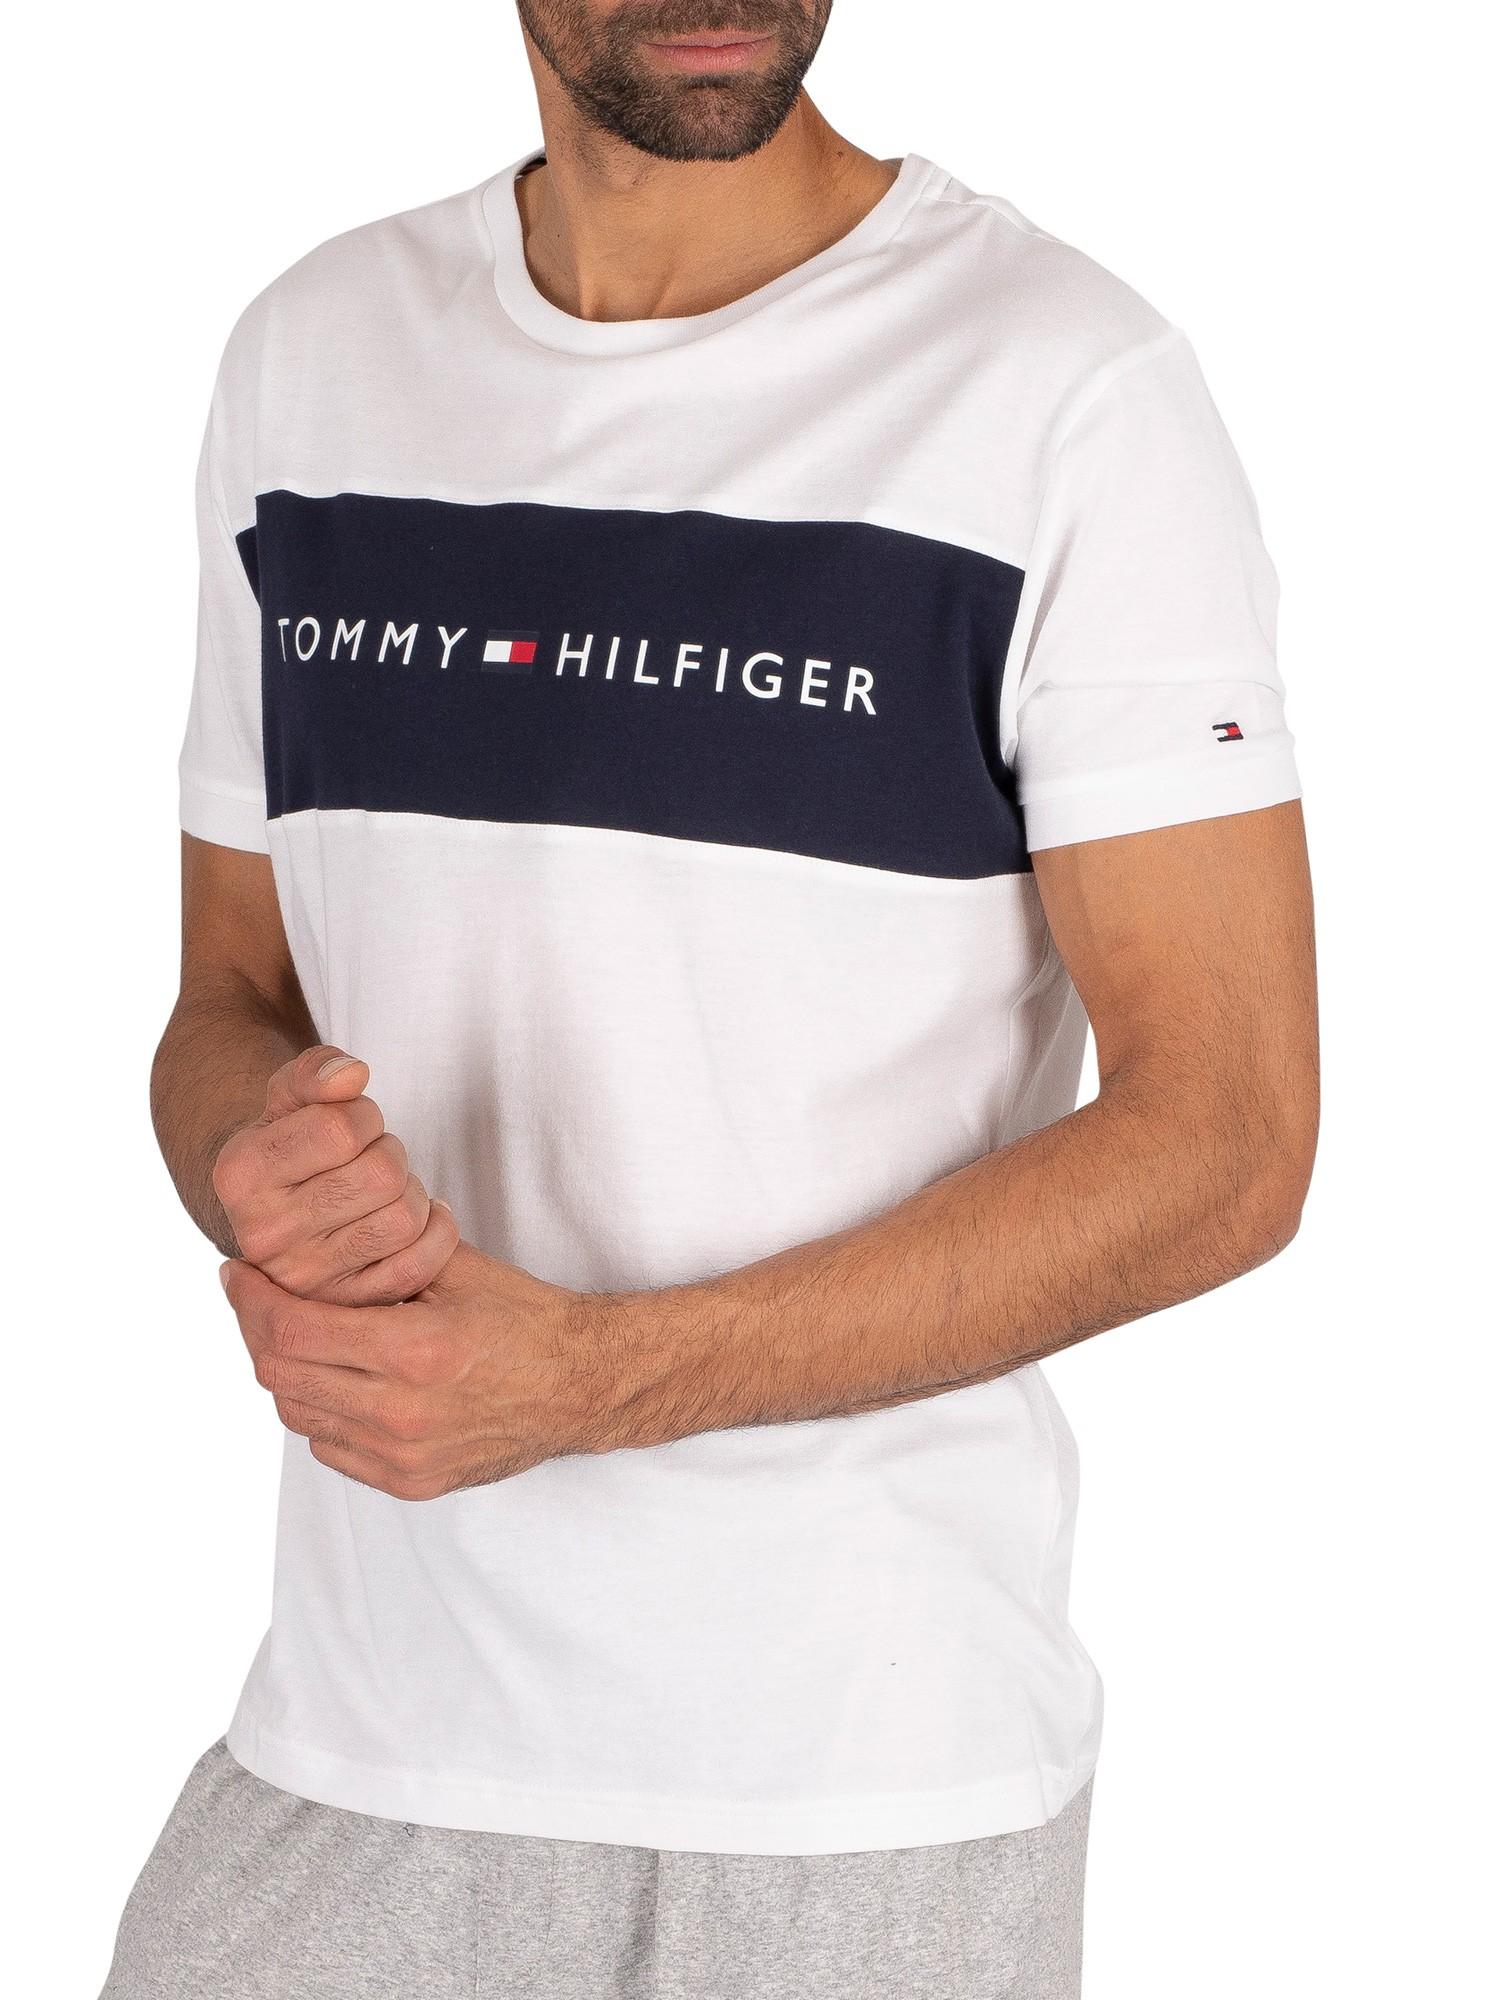 Tommy Hilfiger Cotton Lounge Logo Flag T Shirt in White for Men - Save 27%  - Lyst